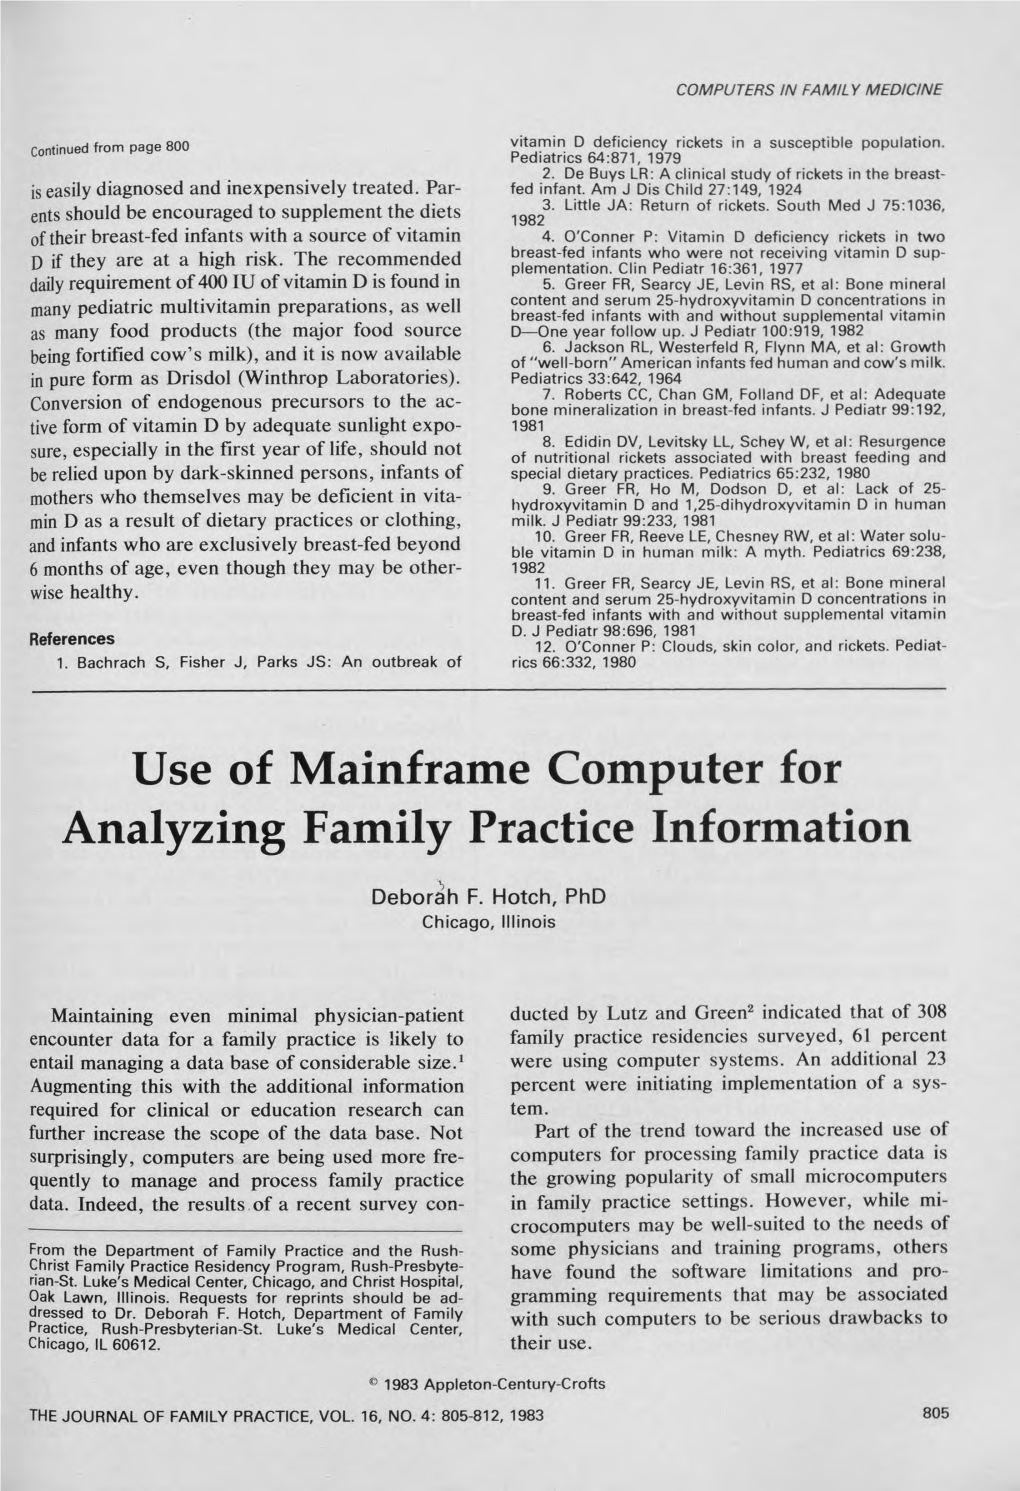 Use of Mainframe Computer for Analyzing Family Practice Information